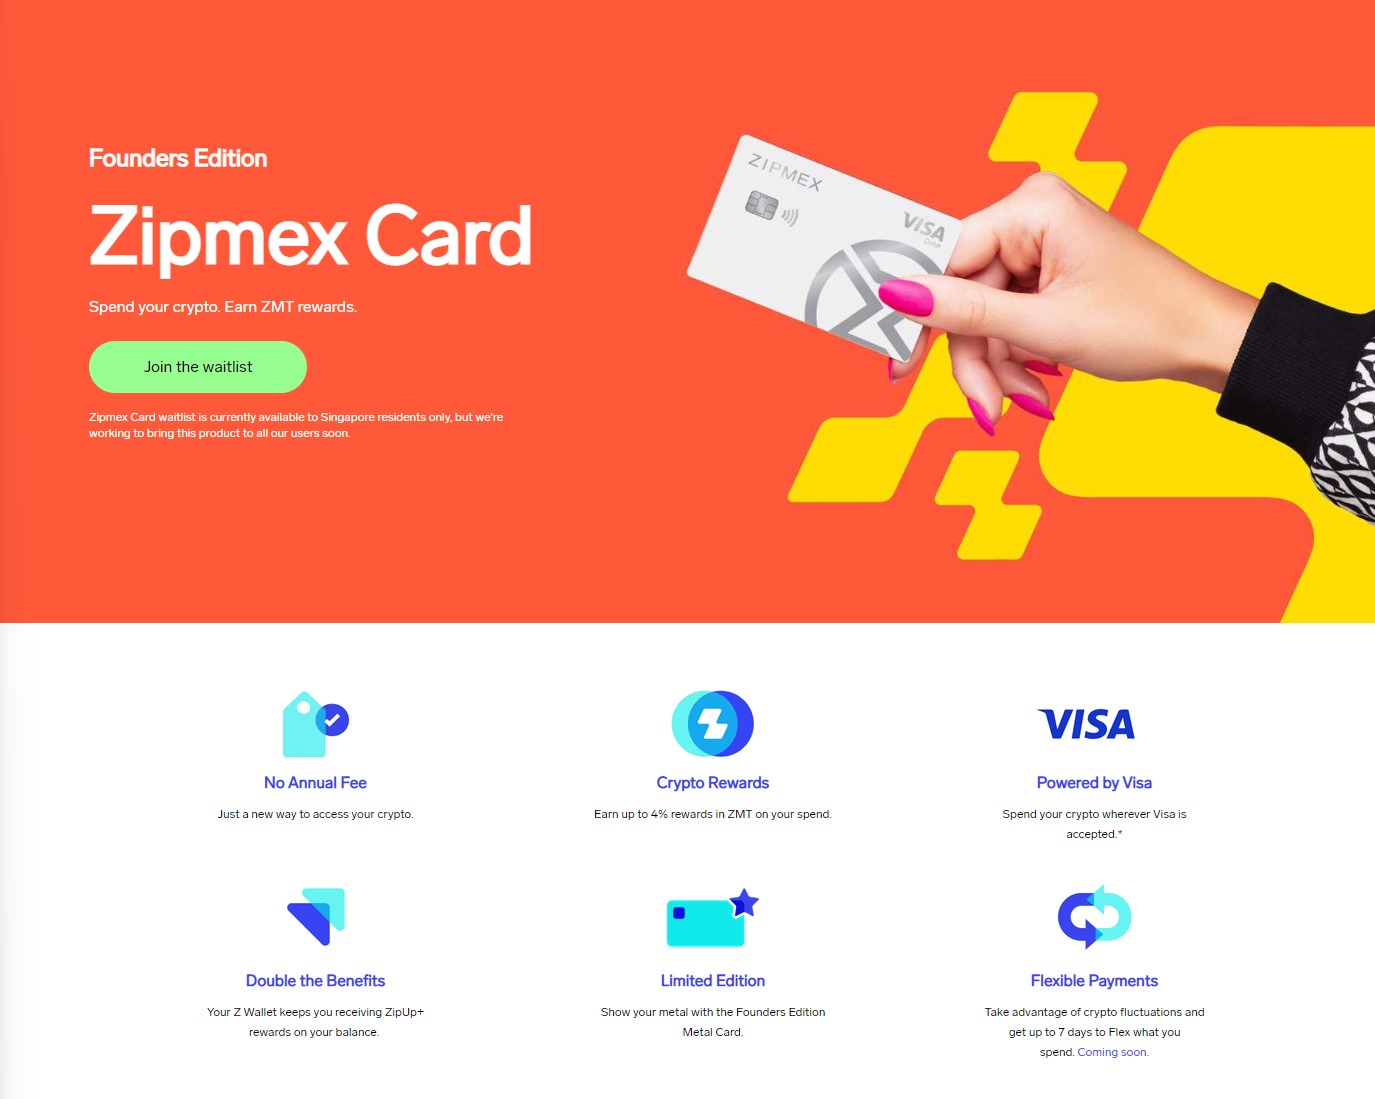 Zipmex card features